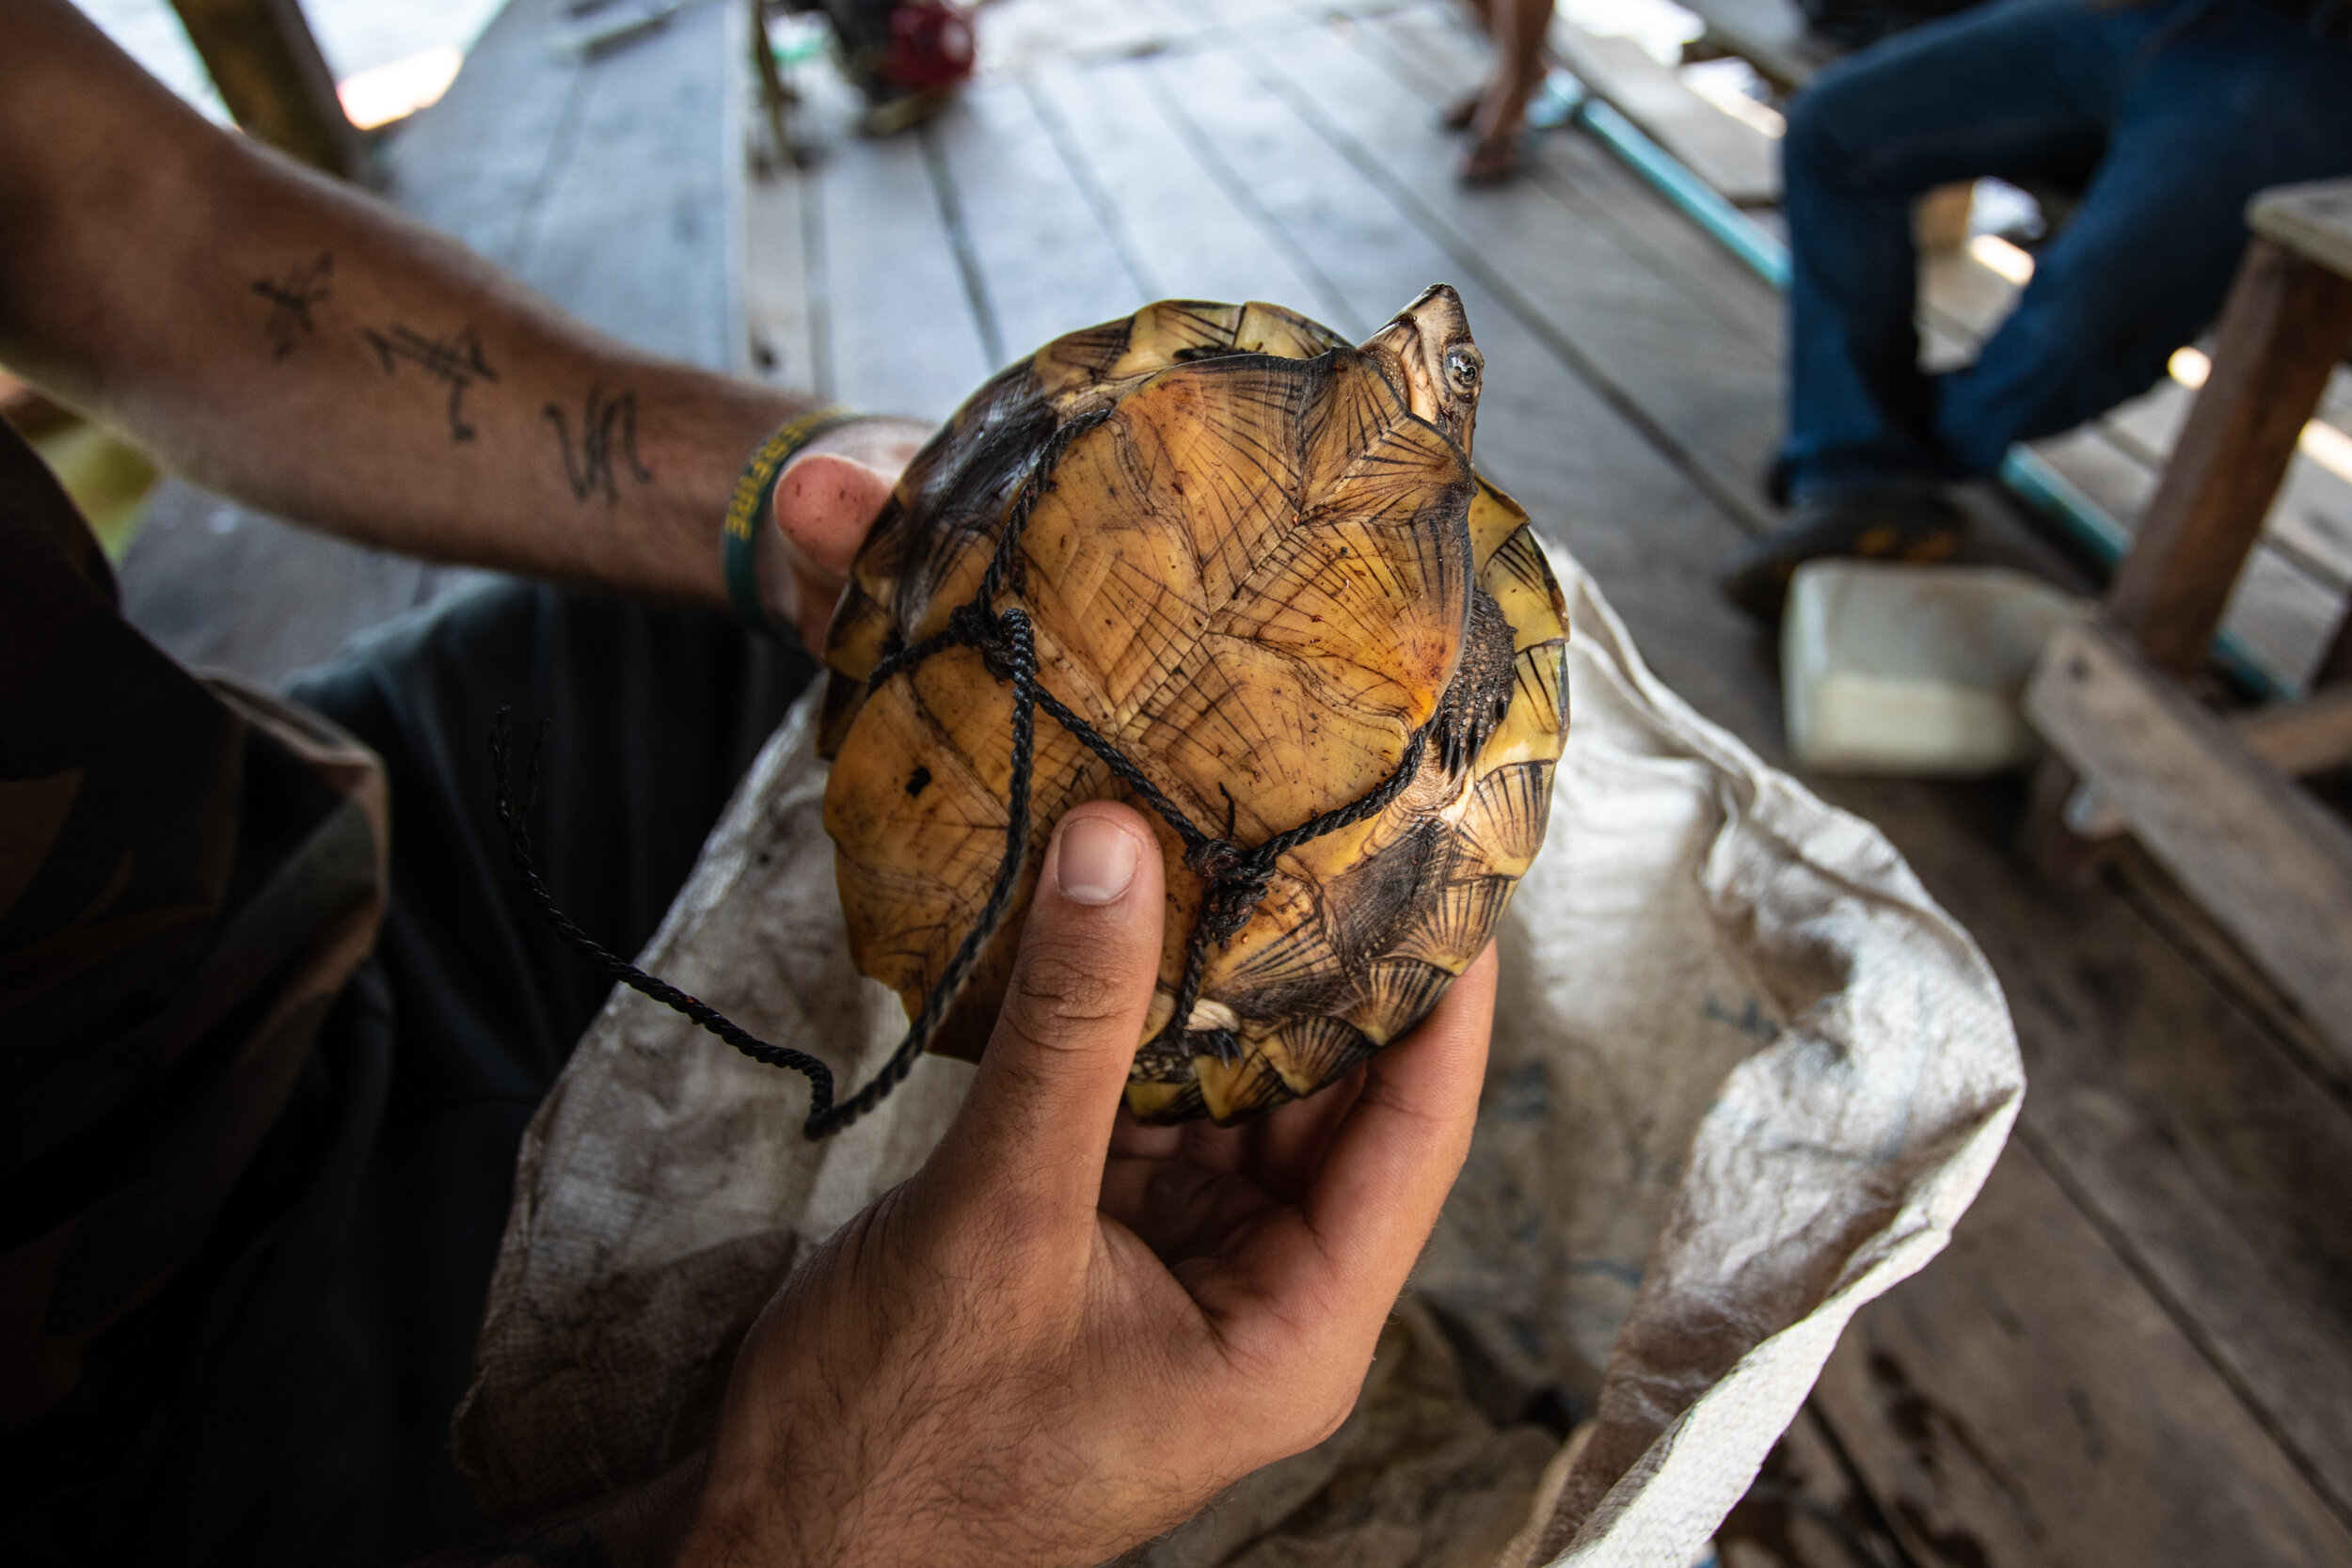  A Wildlife Alliance ranger unties cords on confiscated turtles seized during a standard boat check by a patrol along the Preak Piphot River. The cord is used by the fishermen to carry the turtles around more easily. Typically fishermen stick to fish